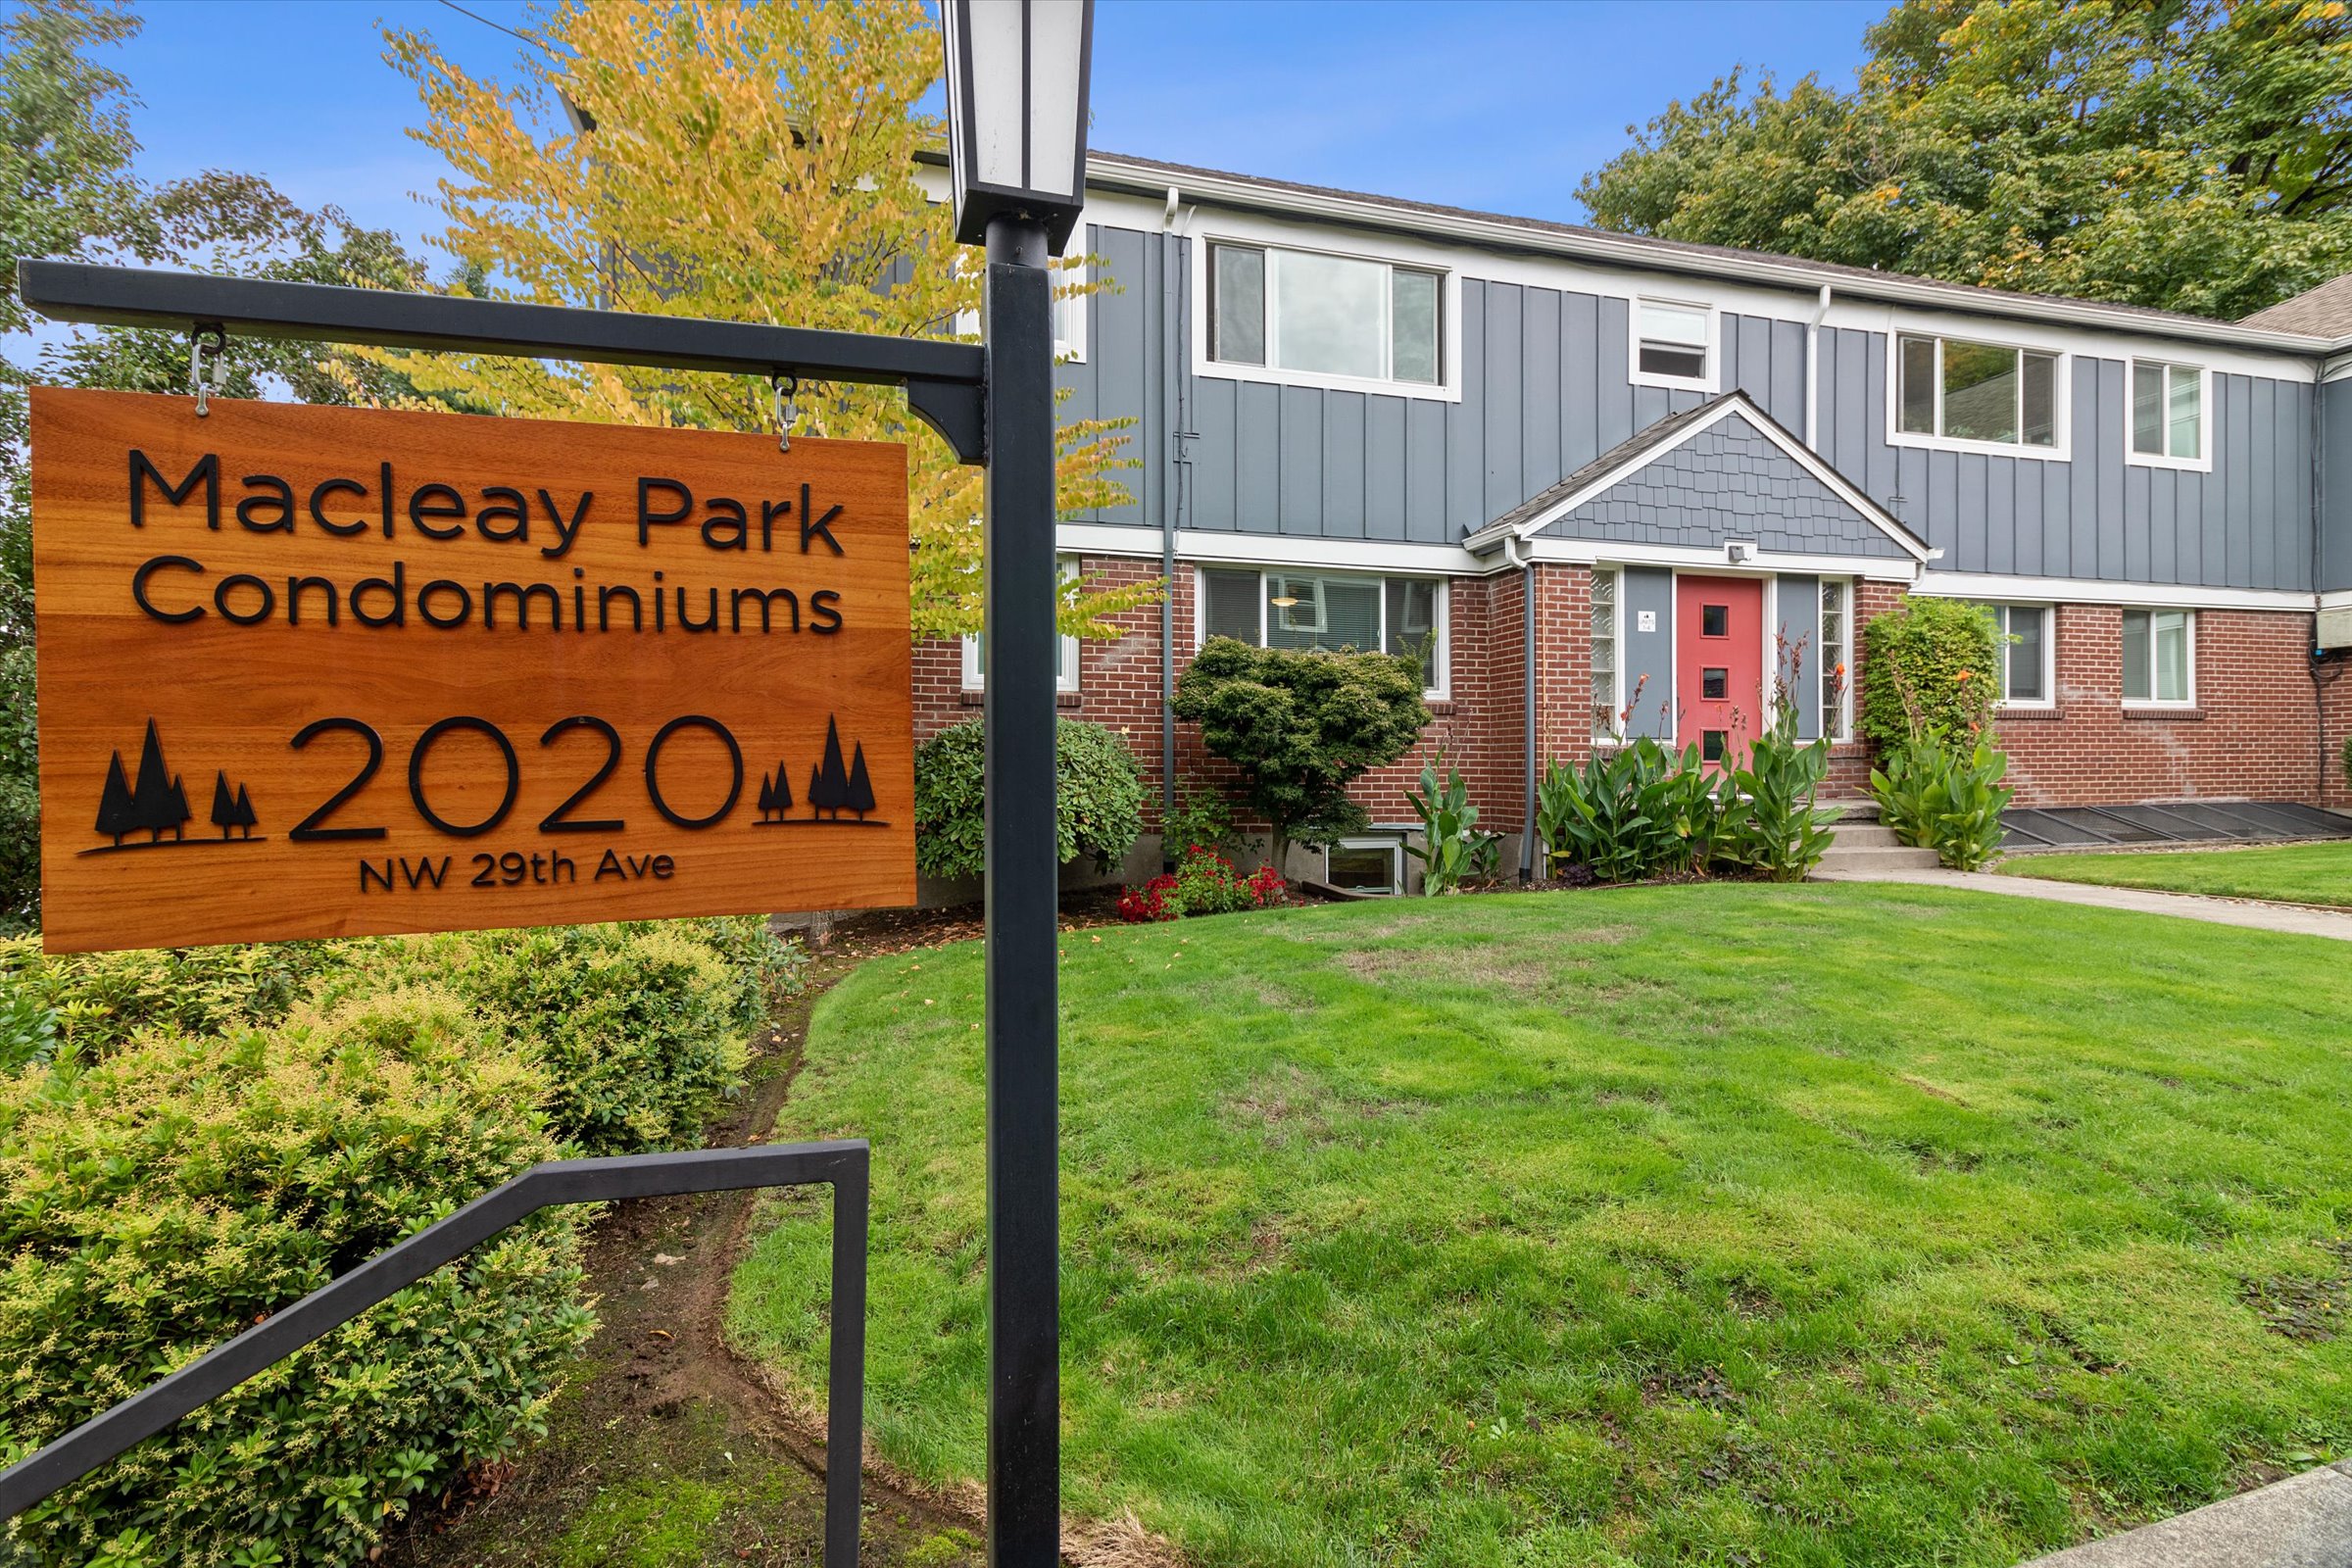 Now Available! 2020 NW 29th Ave, #1, Portland, Offered for $350,000